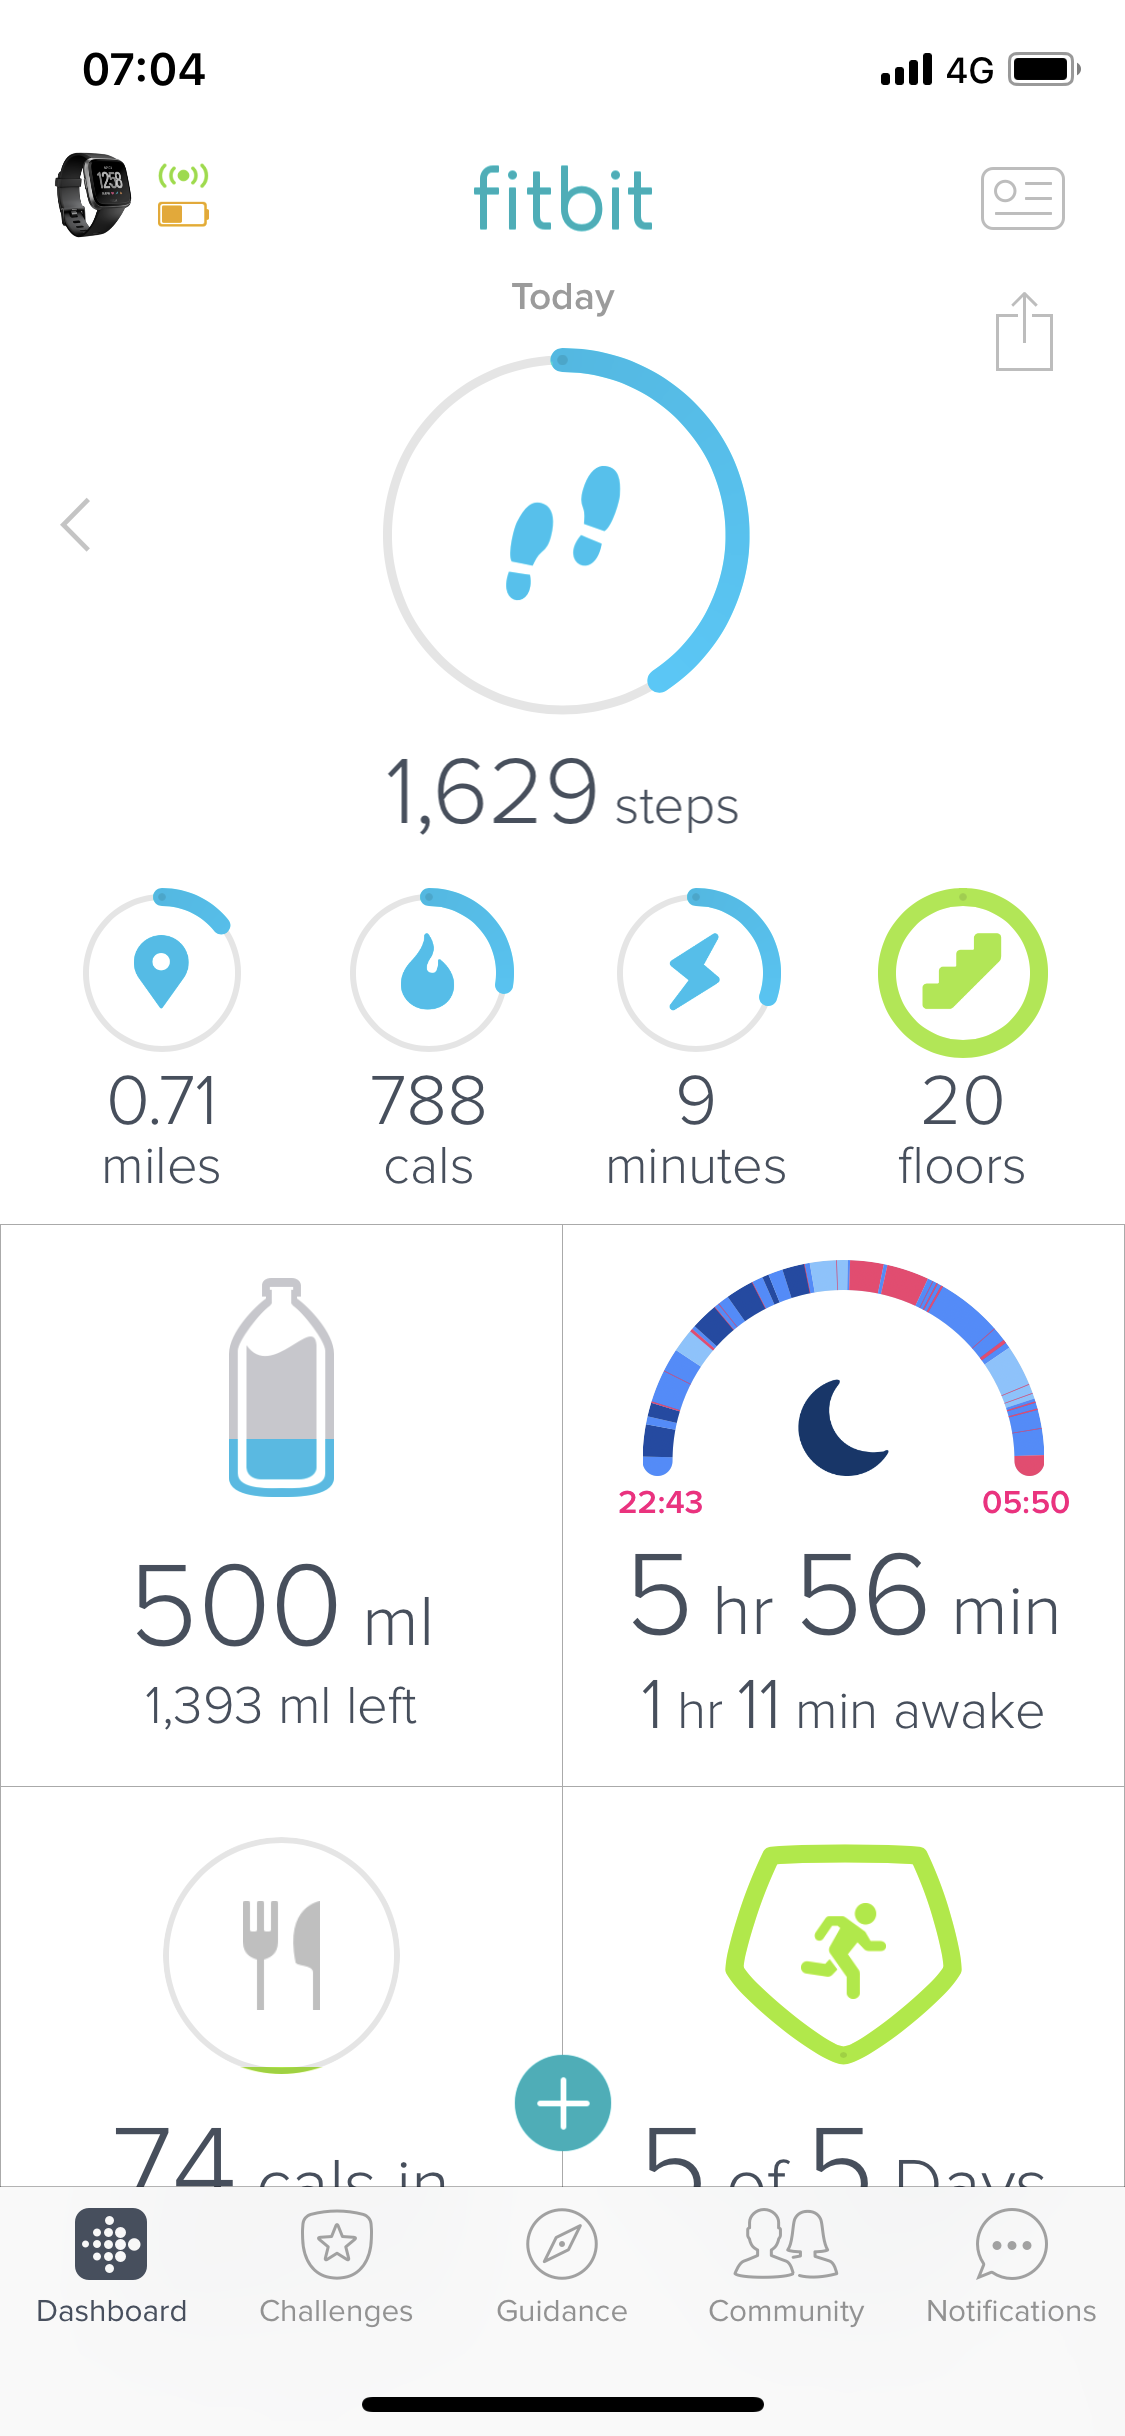 fitbit steps inaccurate